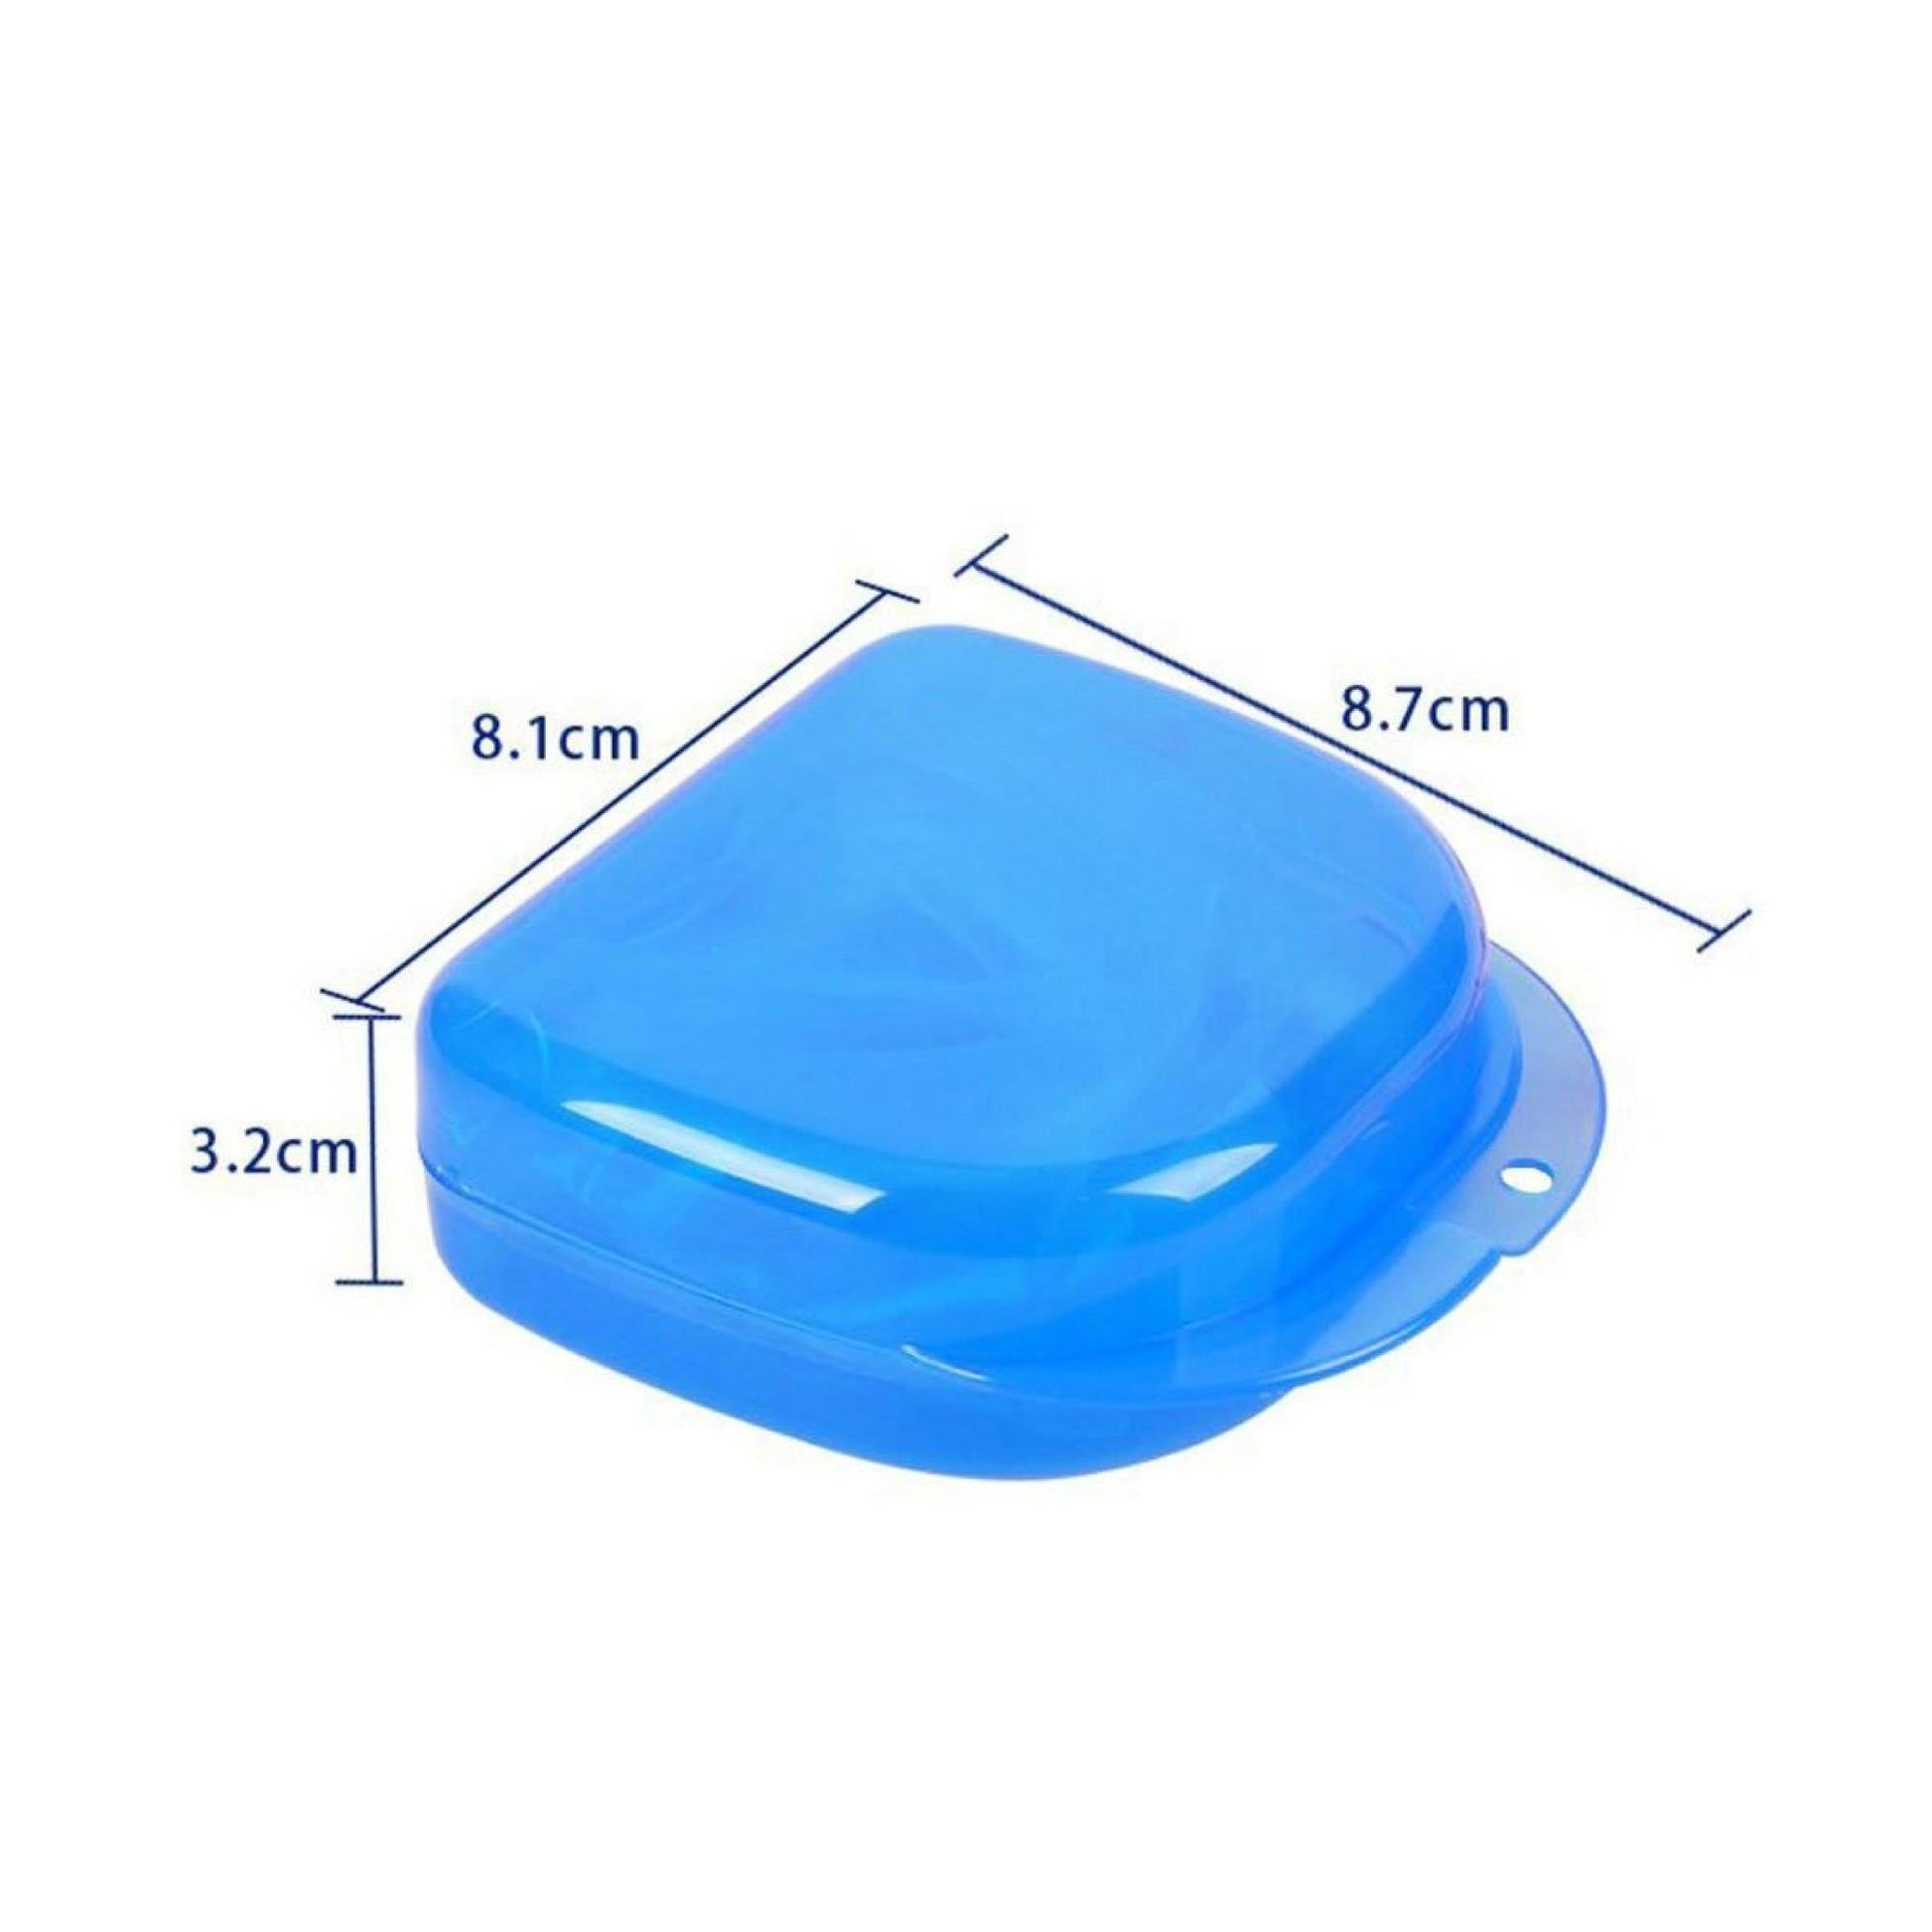 Anti Snoring Aid Mouth Guard - Adjustable Sleeping and Breathing Mouthguard